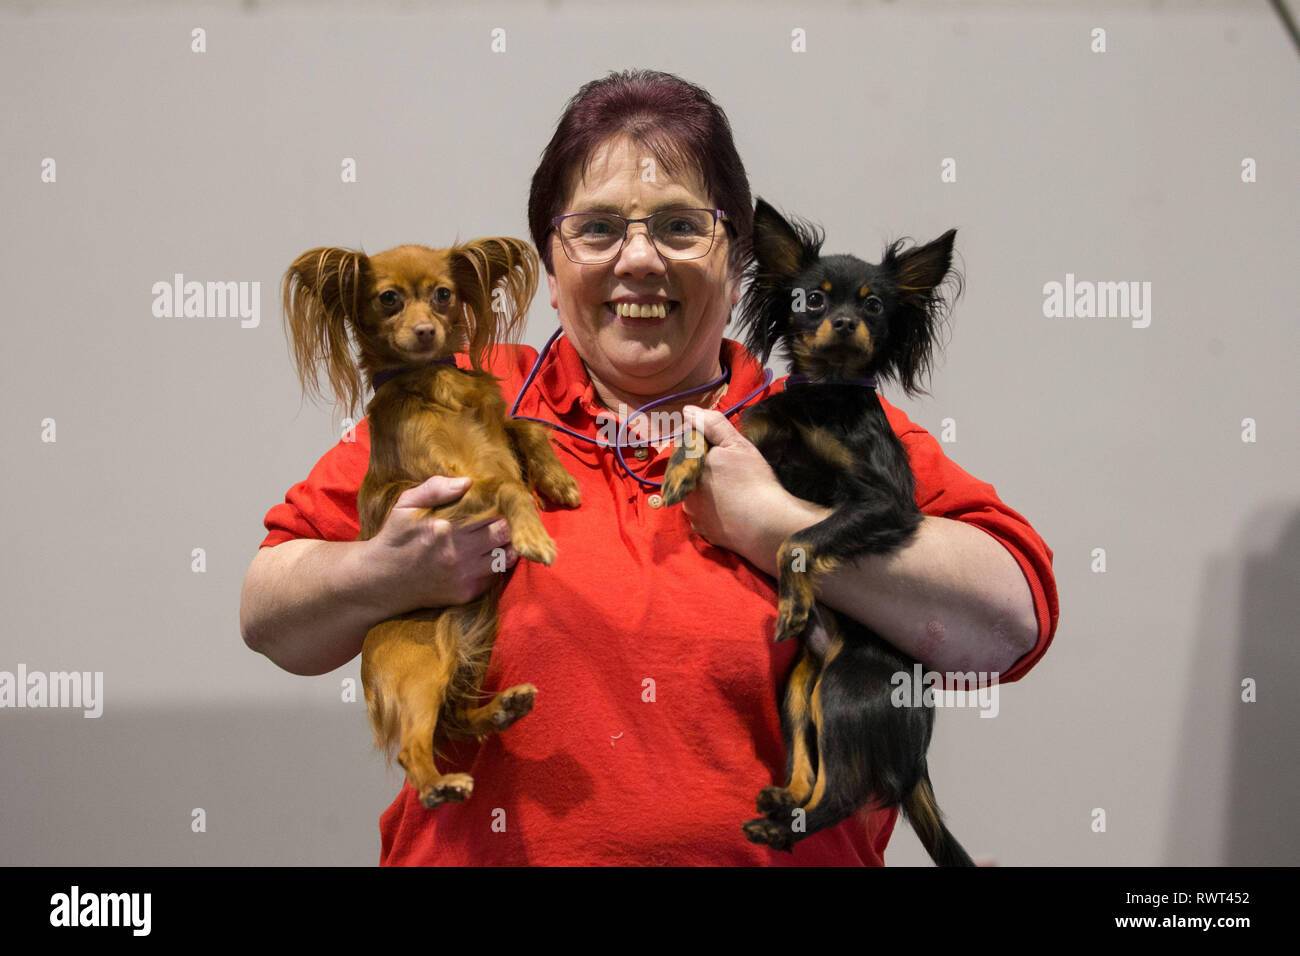 Amanda Orchard with her Russian Toy dogs at the Birmingham National Exhibition Centre (NEC) for the first day of the Crufts Dog Show 2019, Russian Toy dogs are one of the new breeds for 2019. Stock Photo